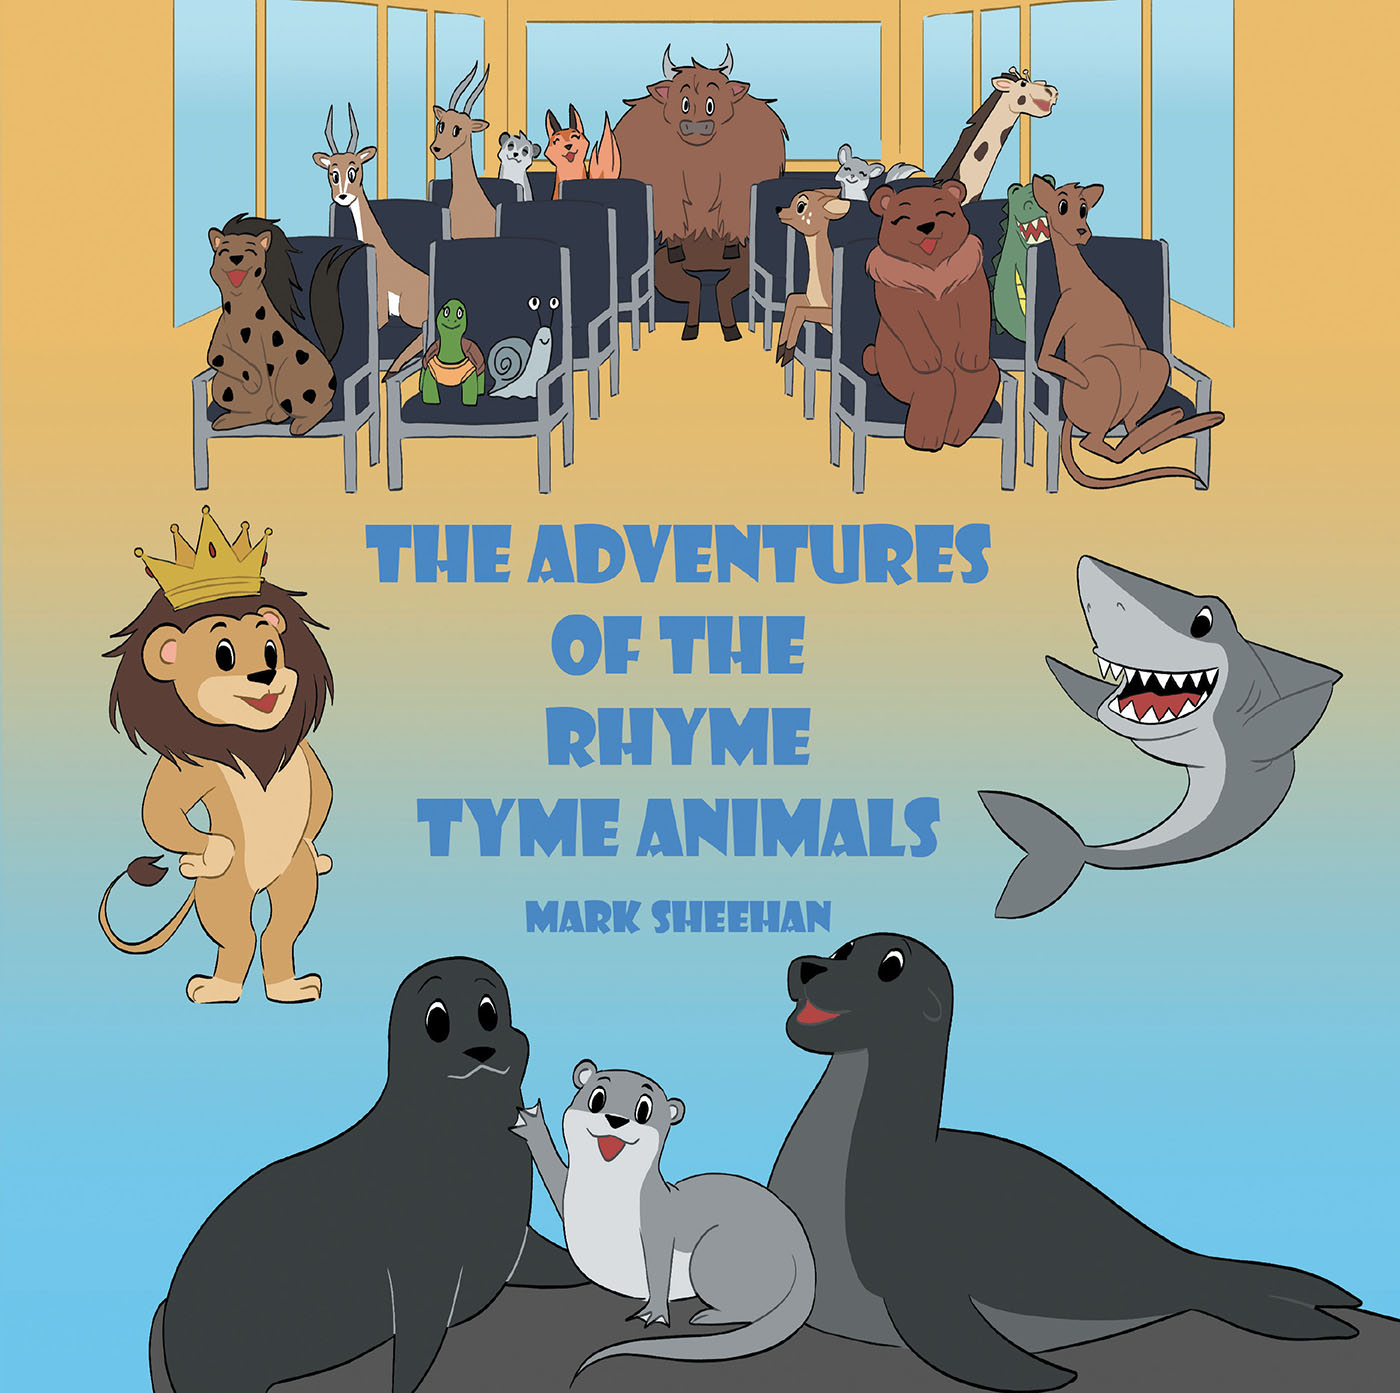 Author Mark Sheehan’s New Book "The Adventures of the Rhyme Tyme Animals" Follows a Group of Animals as They Make Their Way to the Beach with All Their Different Friends